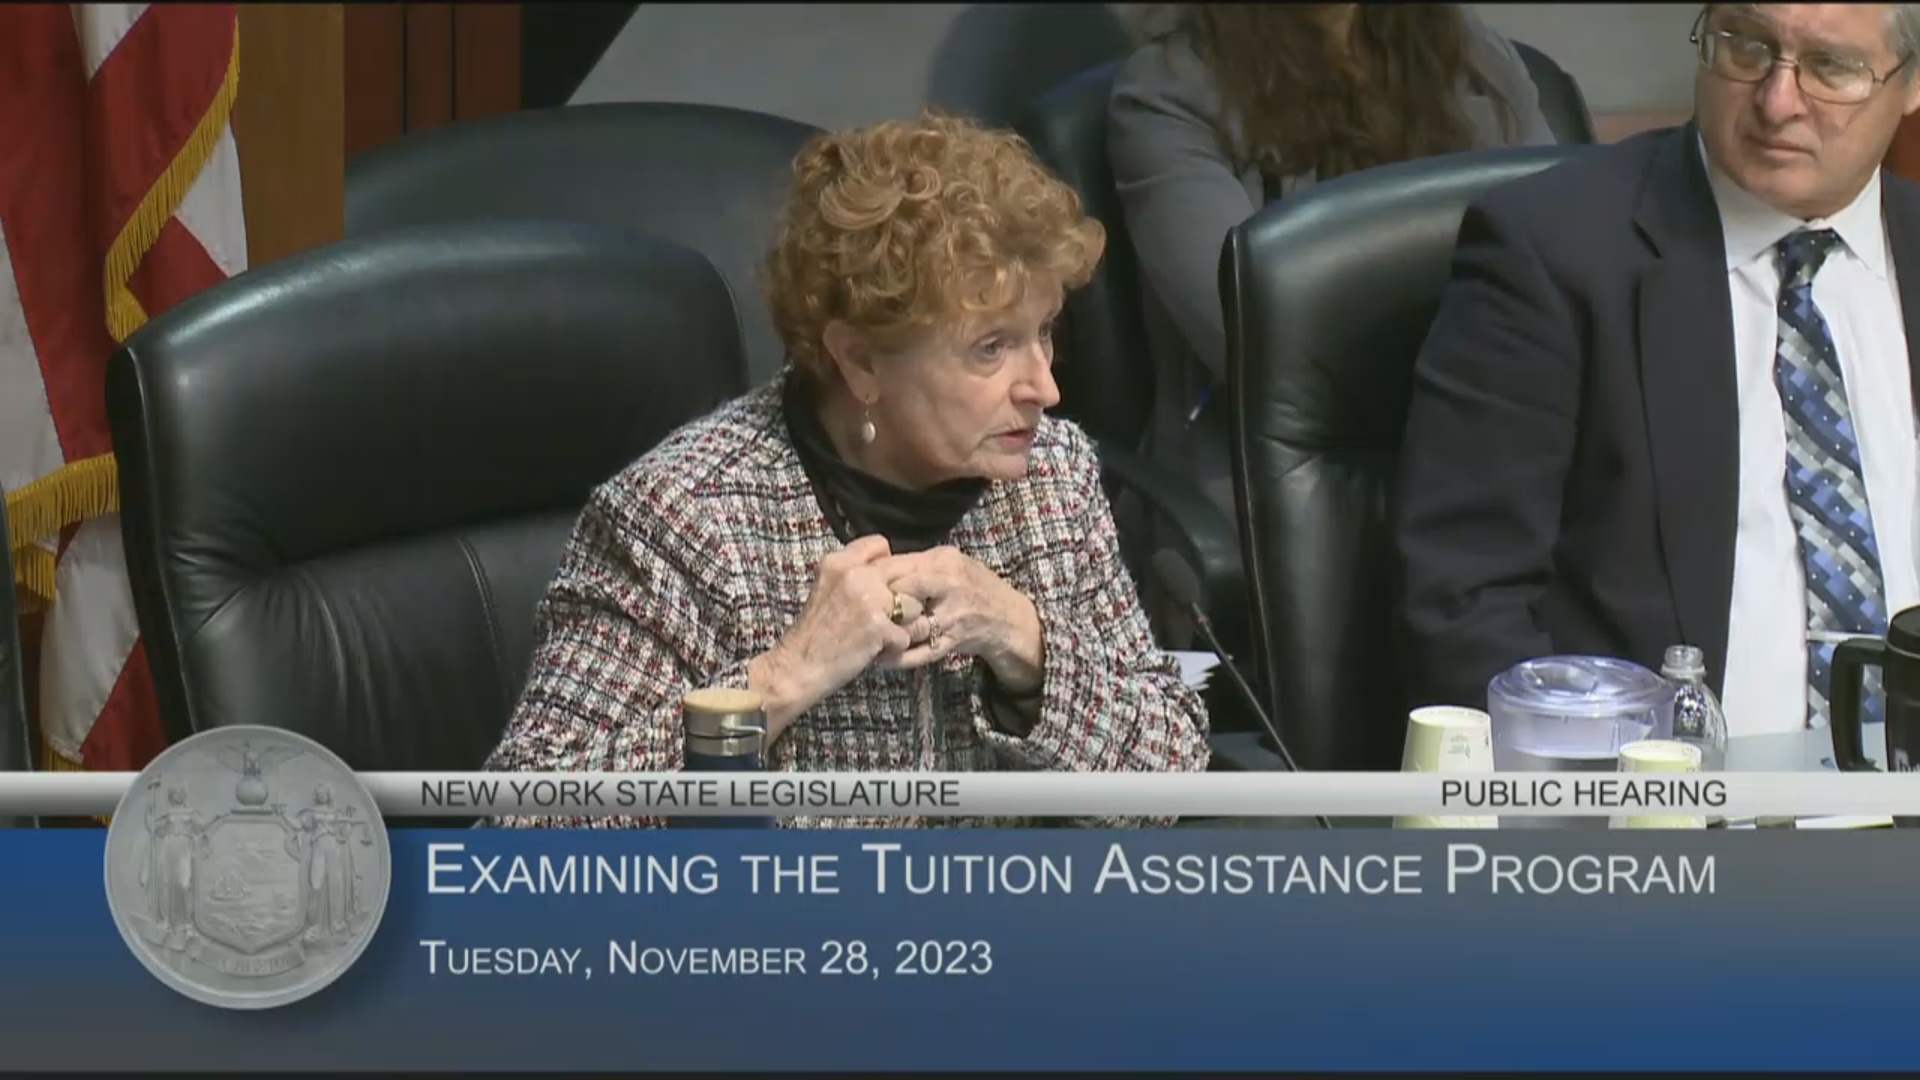 Simon Questions UUP President During Hearing on New York State Tuition Assistance Program